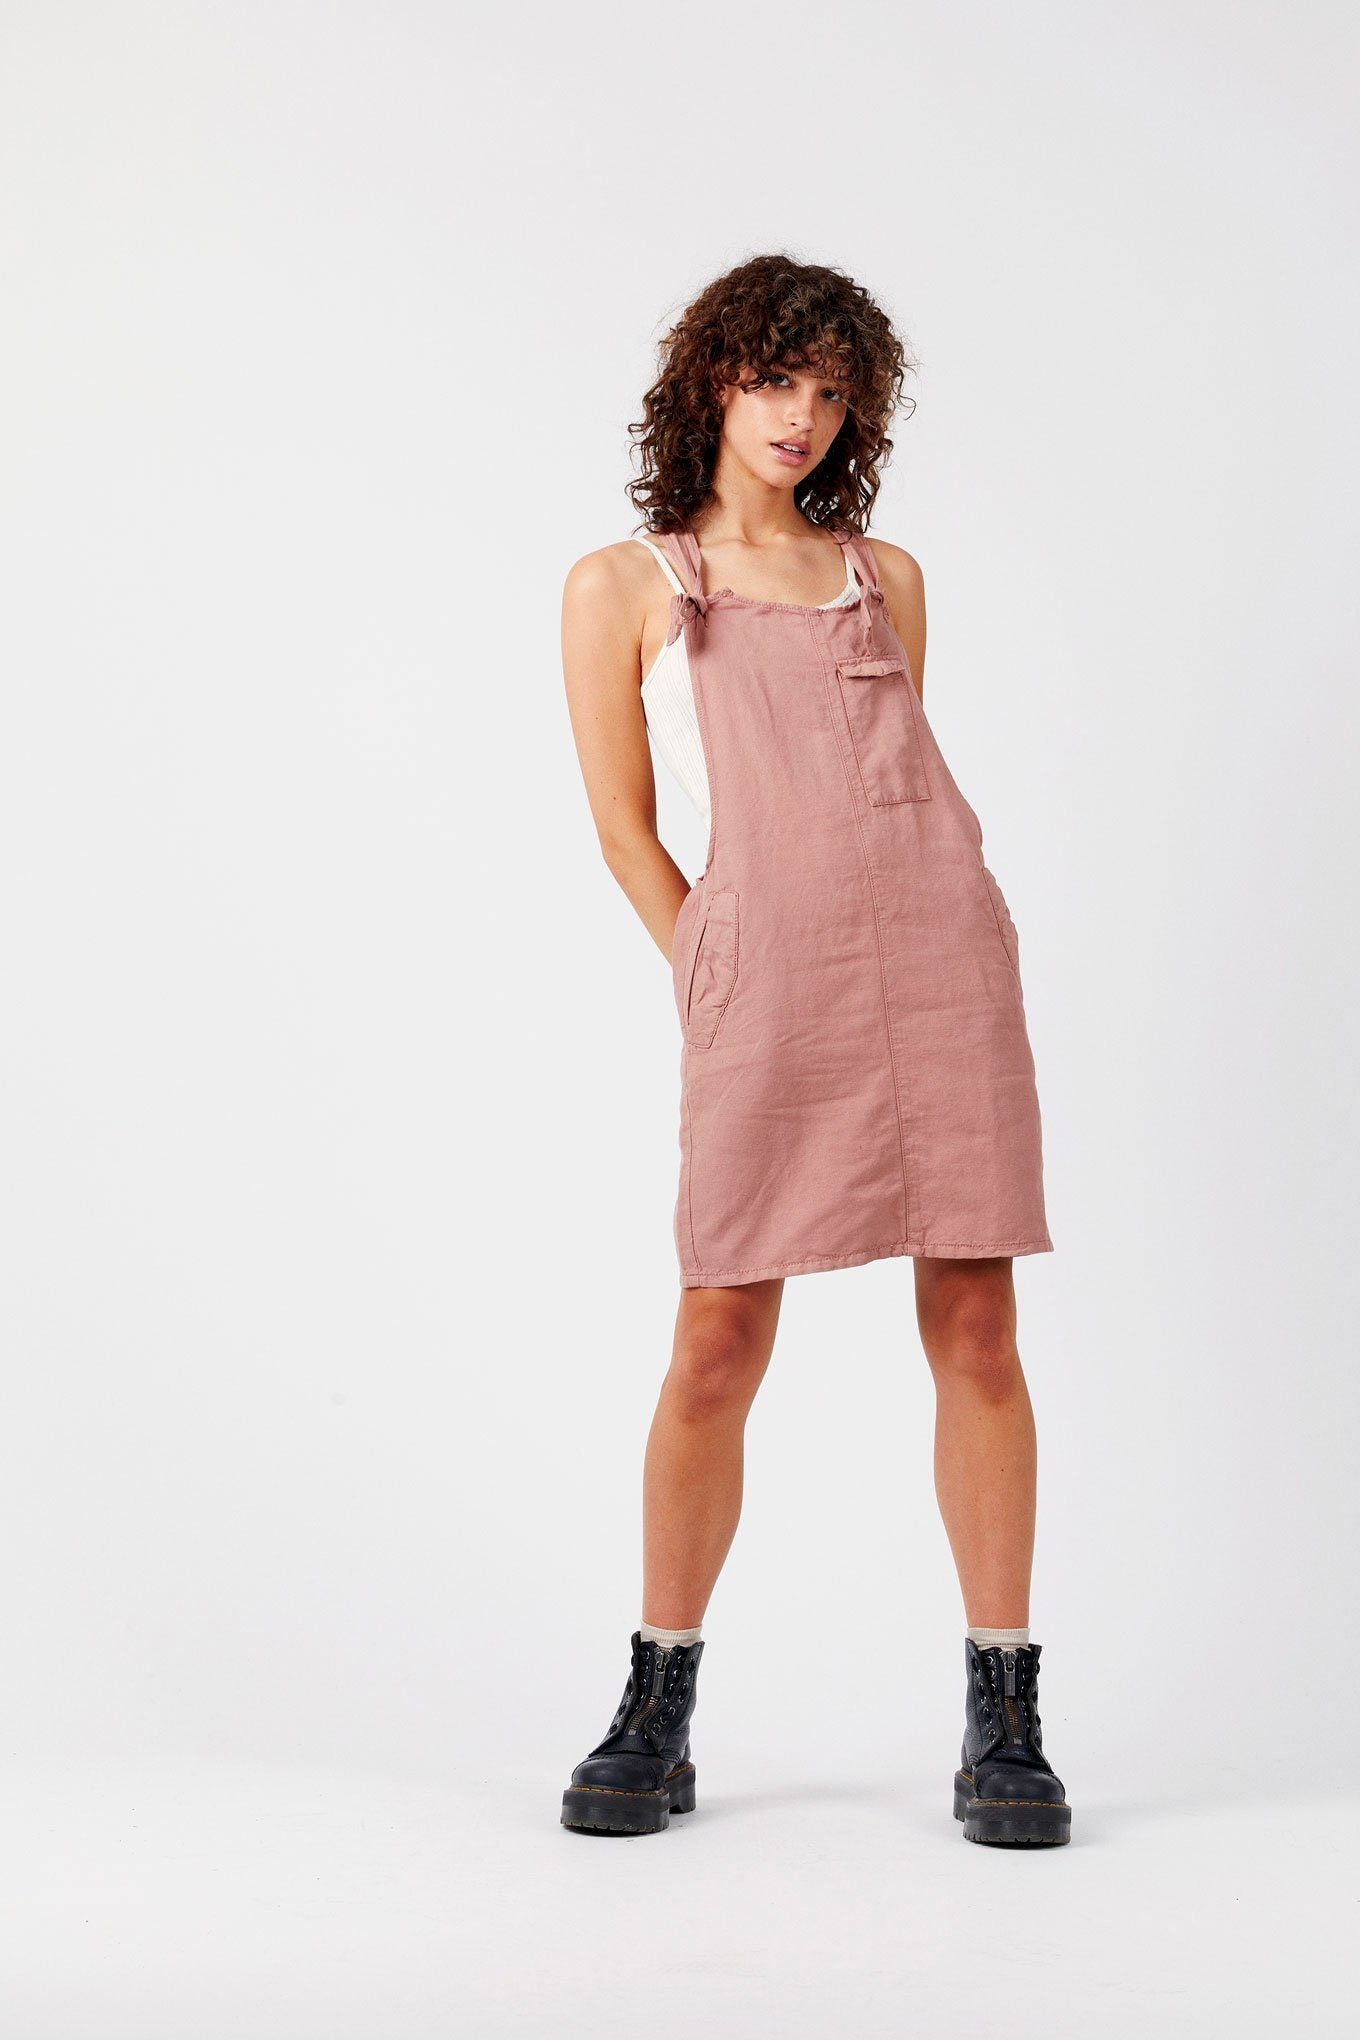 PEGGY Pink - GOTS Organic Cotton Dress by Flax & Loom, SIZE 3 / UK 12 / EUR 40